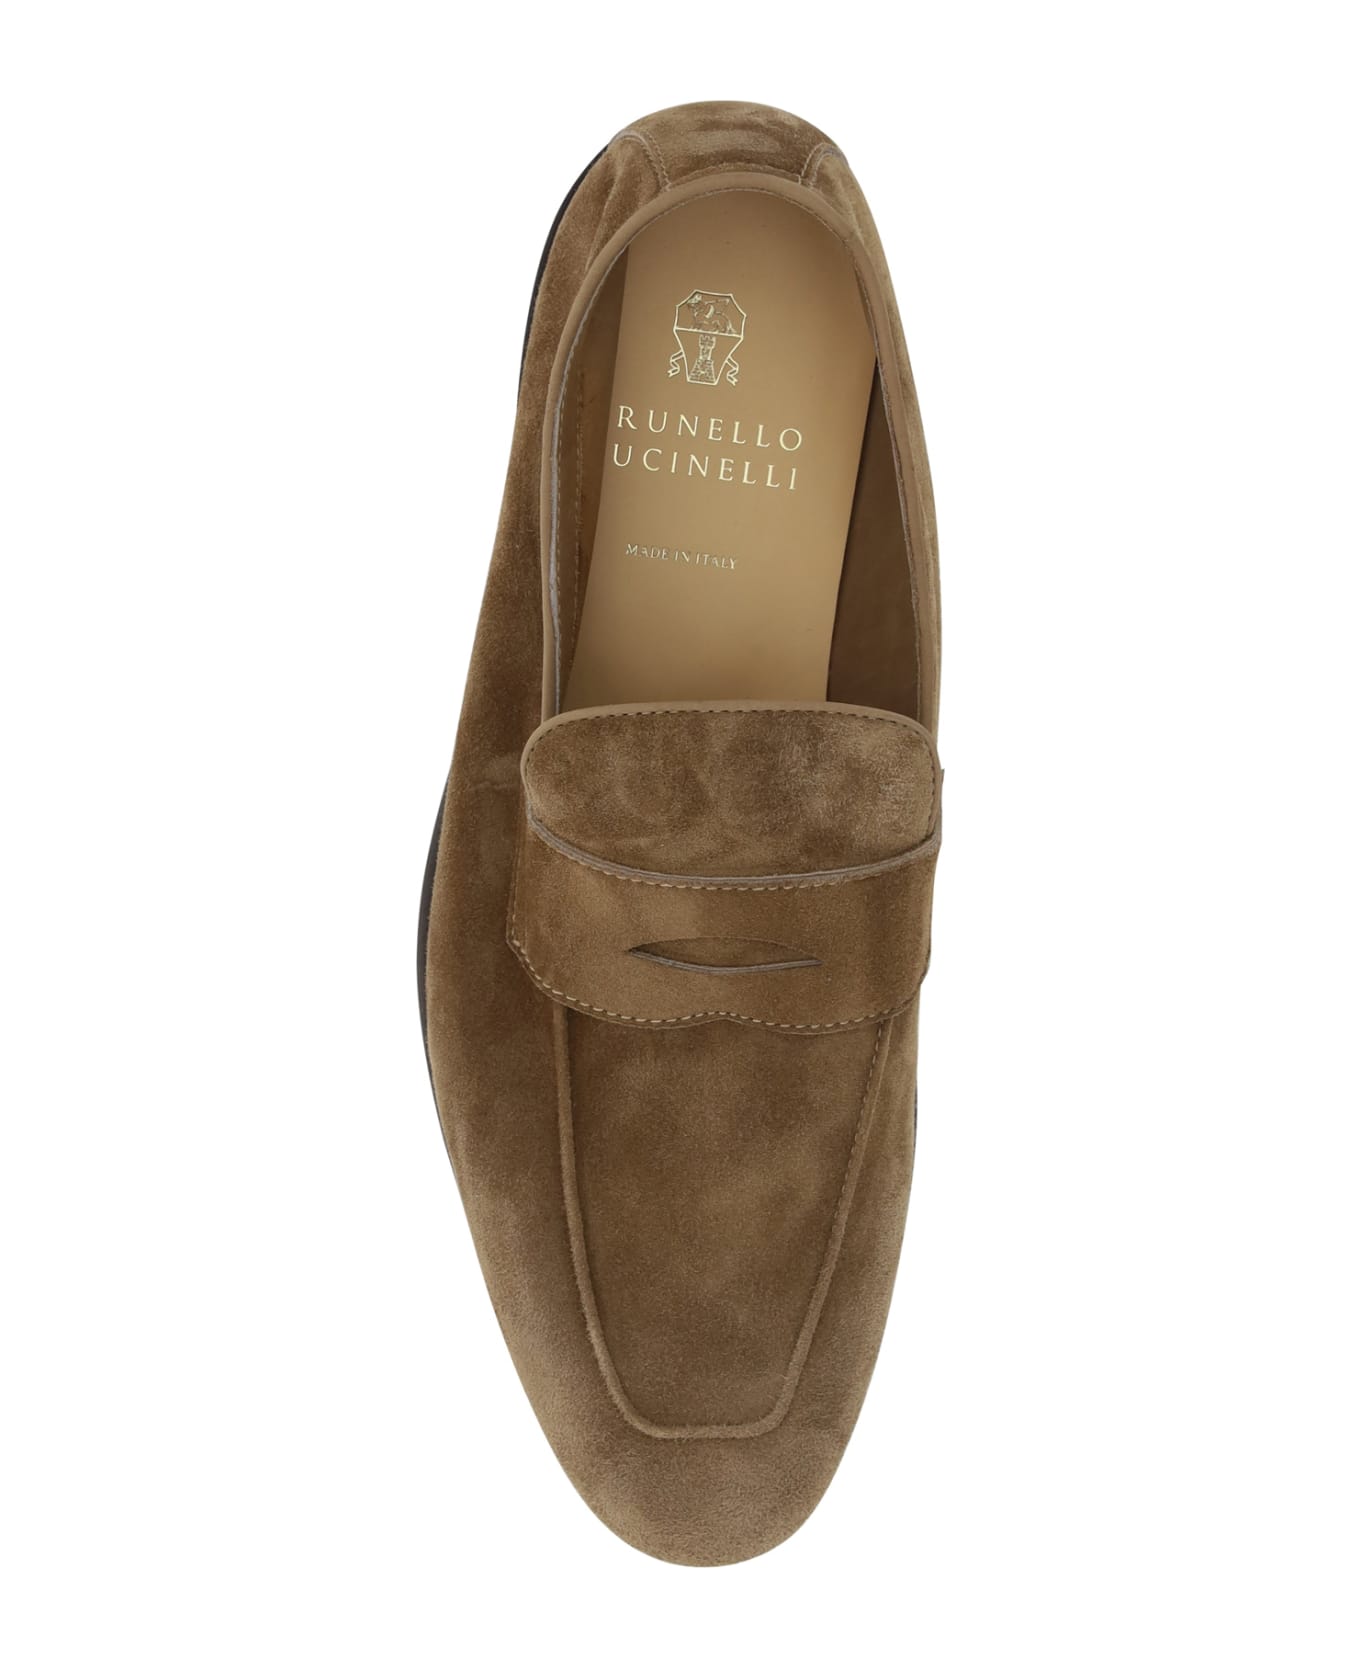 Brunello Cucinelli Unlined Penny Loafers - Brown